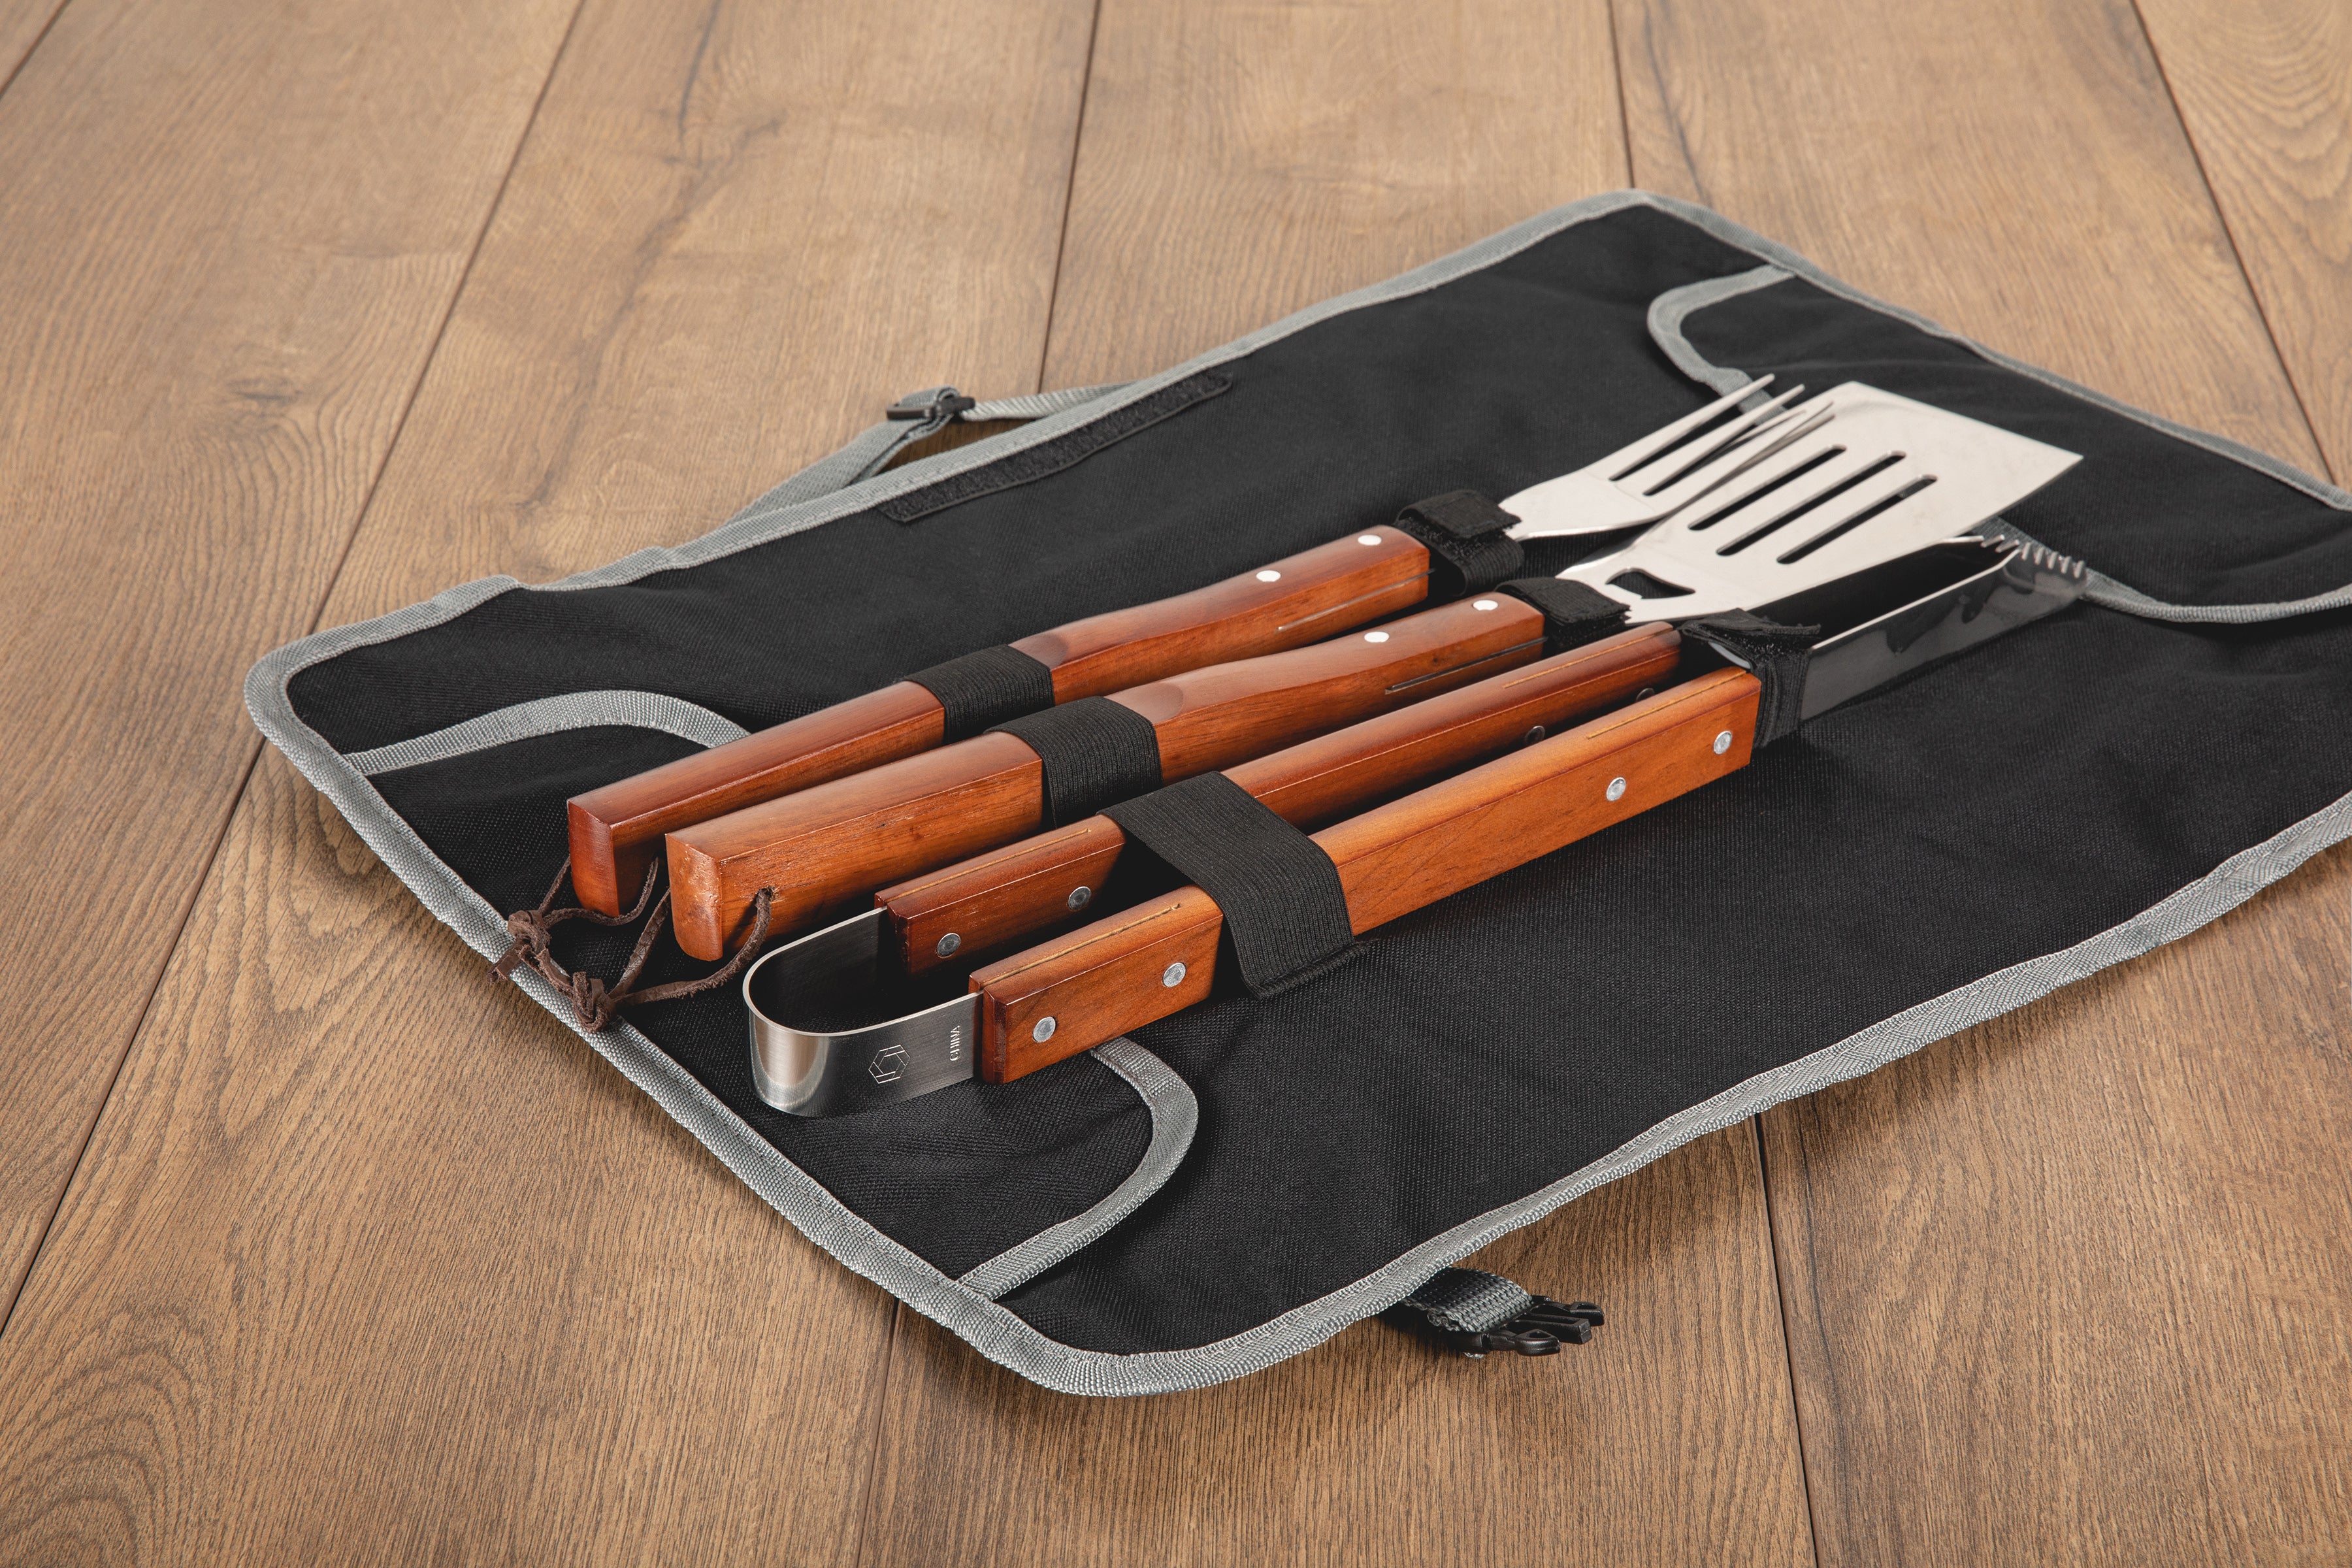 Wyoming Cowboys - 3-Piece BBQ Tote & Grill Set